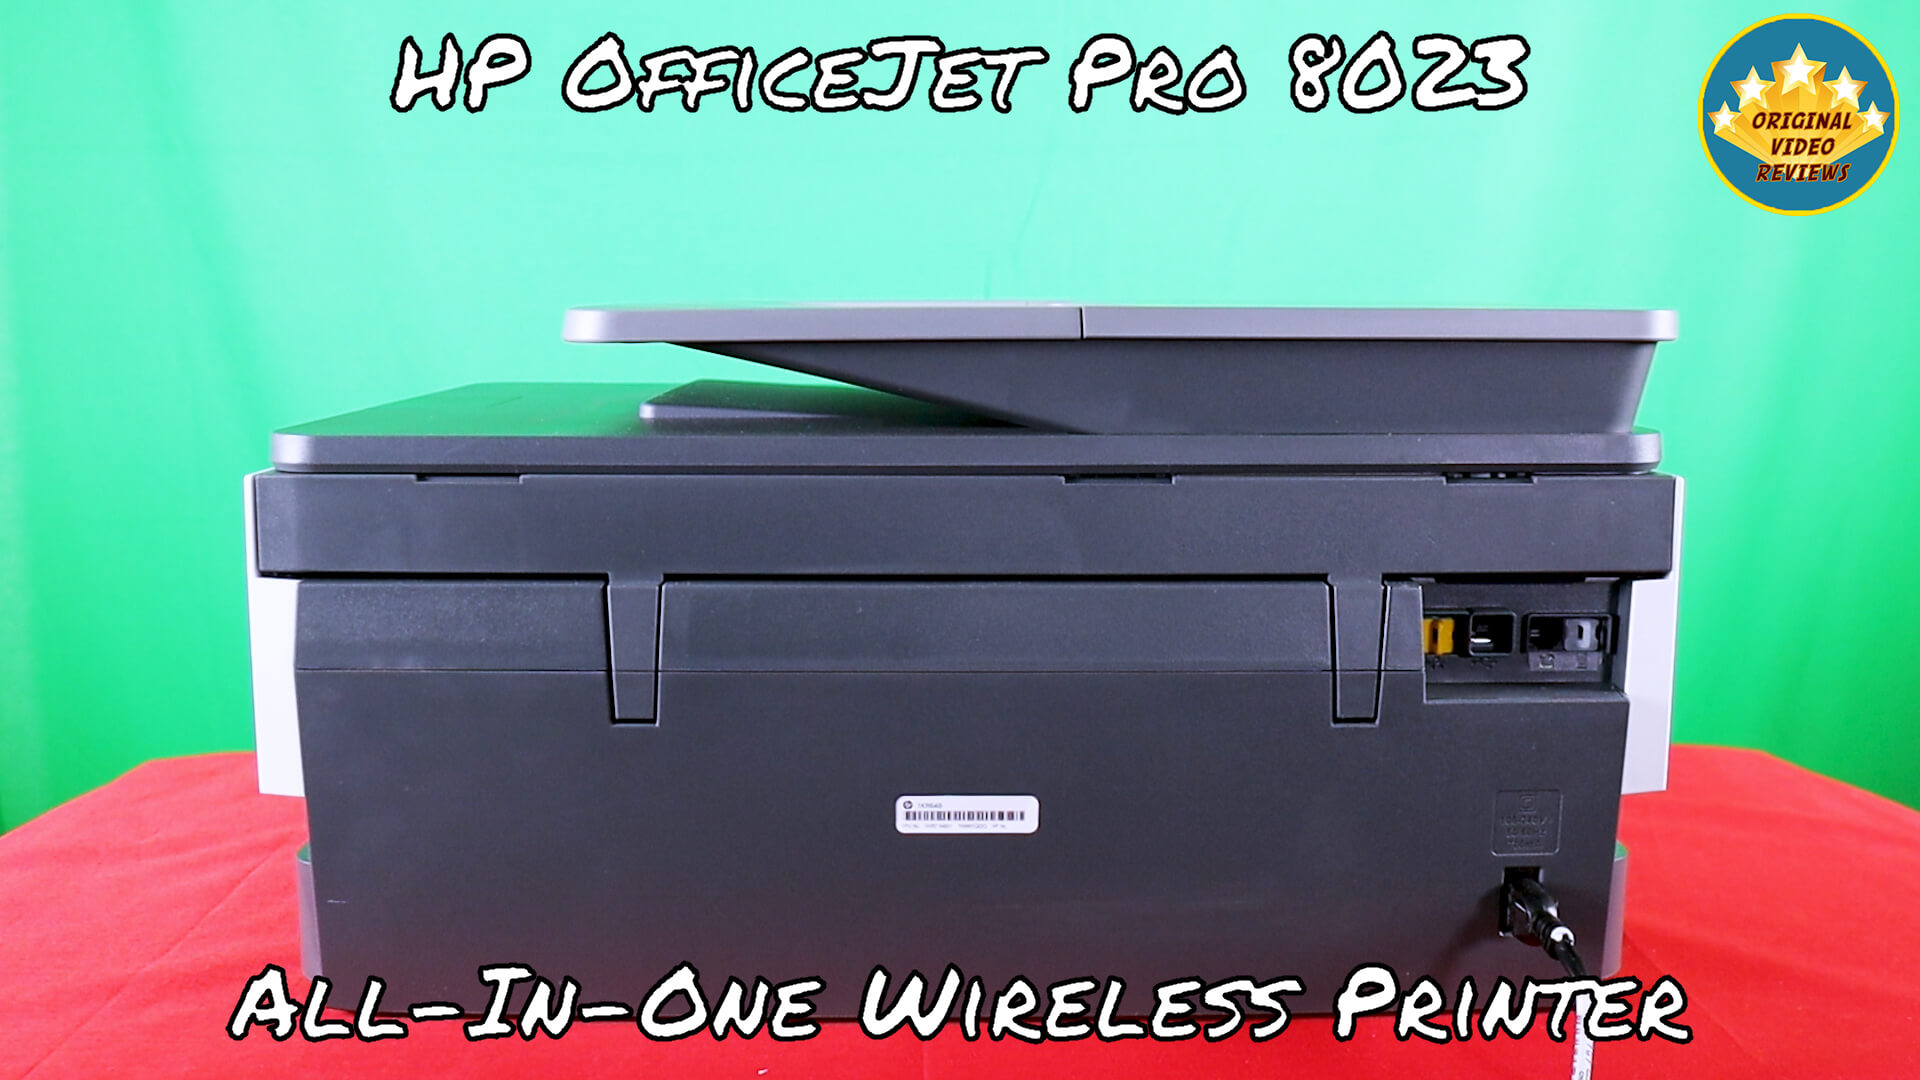 HP OfficeJet Pro 8024 No. 912 M, 3YL78AE (